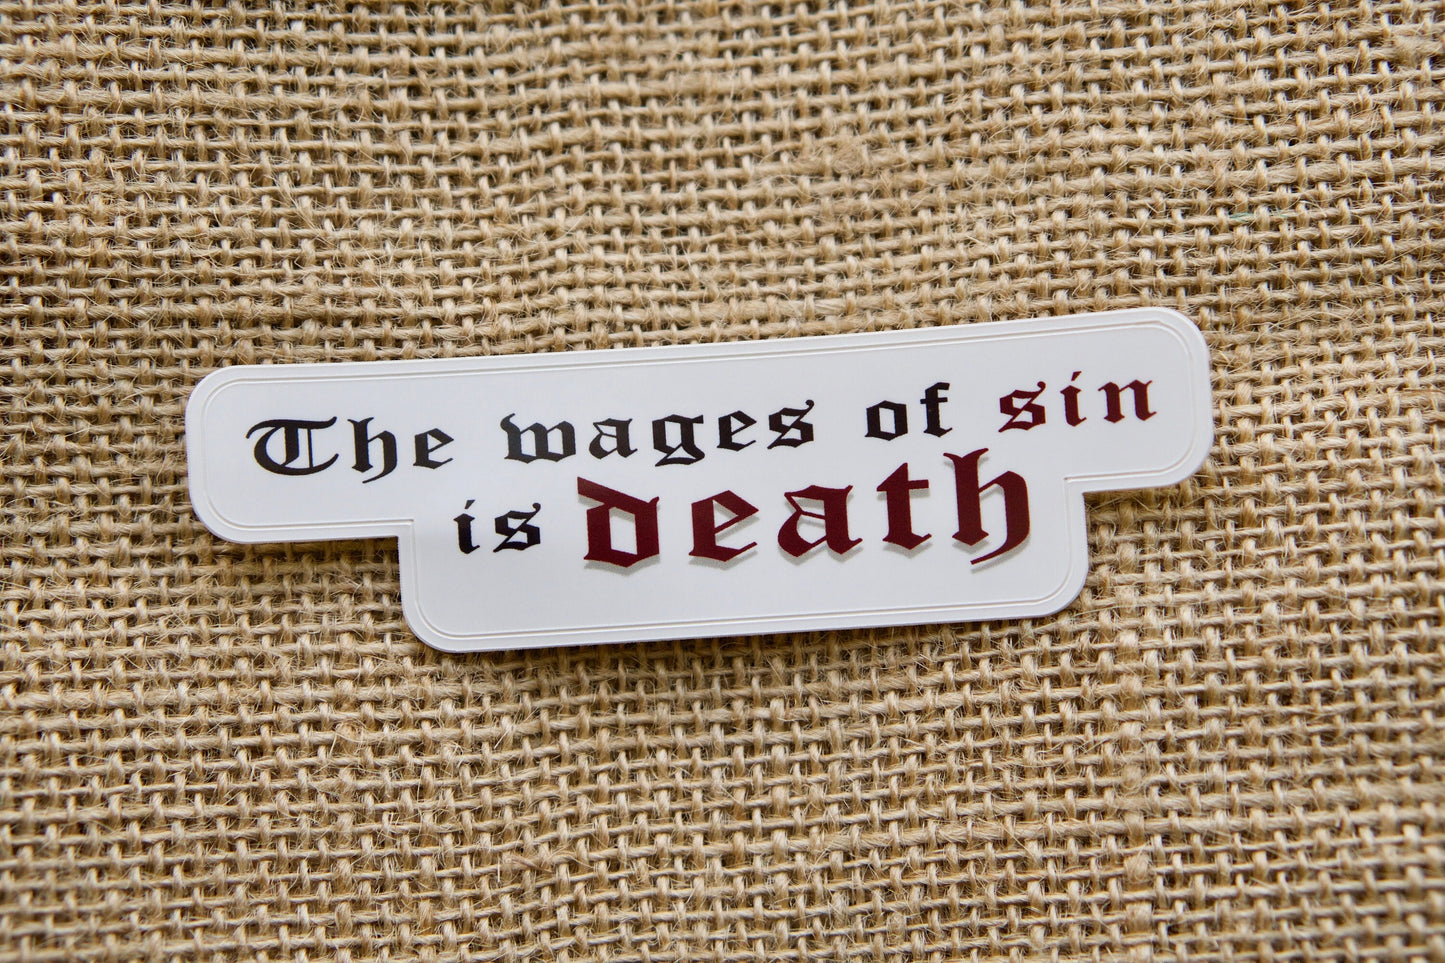 Wages of Sin - Vinyl Sticker: A powerful reminder of the consequences of sin, featuring Romans 6:23 on a durable 4" x 1" sticker. Perfect for laptops, water bottles, and more. Pair with a Sanctus Servo rosary for a thoughtful Catholic gift.